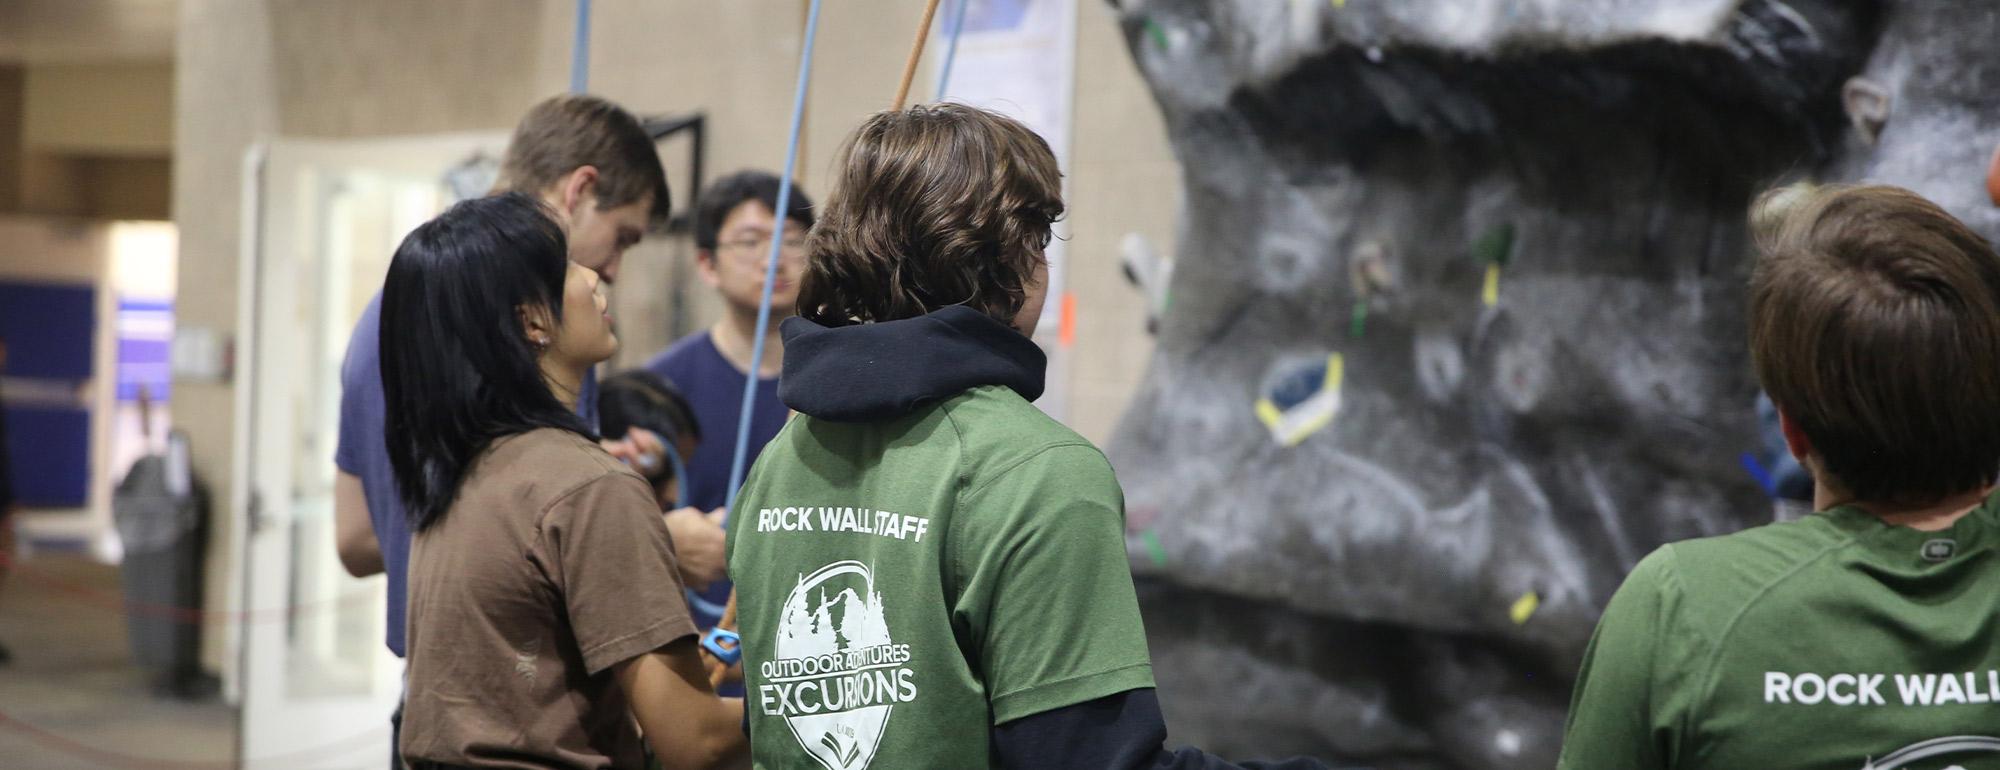 Students at the rock wall practice climbing and tying knots